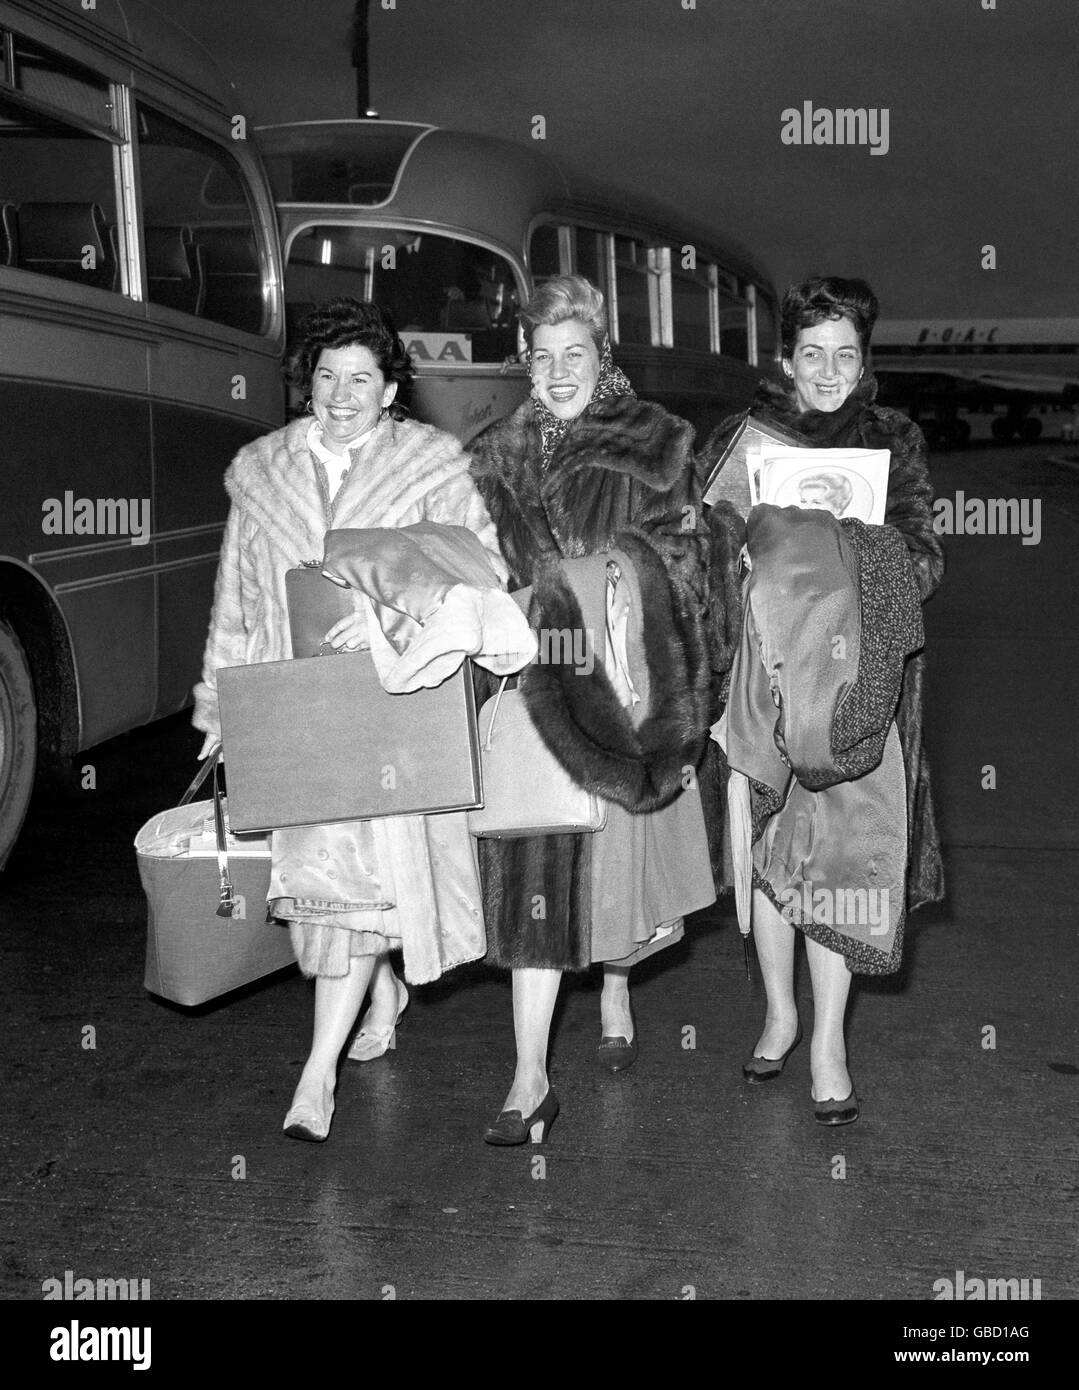 Music - Andrew's Sisters - London Airport - 1960 Stock Photo - Alamy